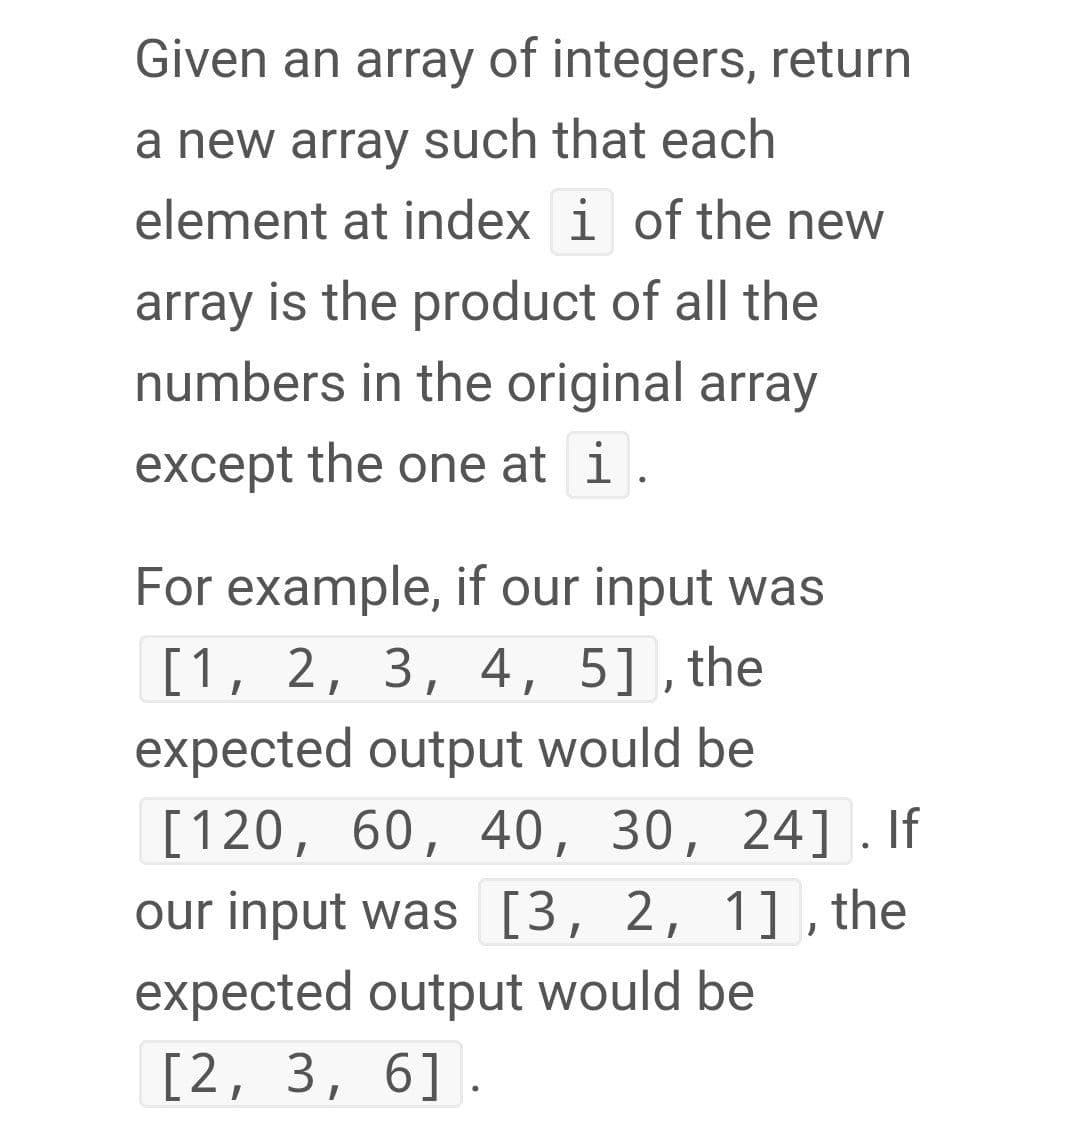 Given an array of integers, return
a new array such that each
element at index i of the new
array is the product of all the
numbers in the original array
except the one at i.
For example, if our input was
[1, 2, 3, 4, 5], the
expected output would be
[120, 60, 40, 30, 24] . If
our input was [3, 2, 1] , the
expected output would be
[2, 3, 6].
